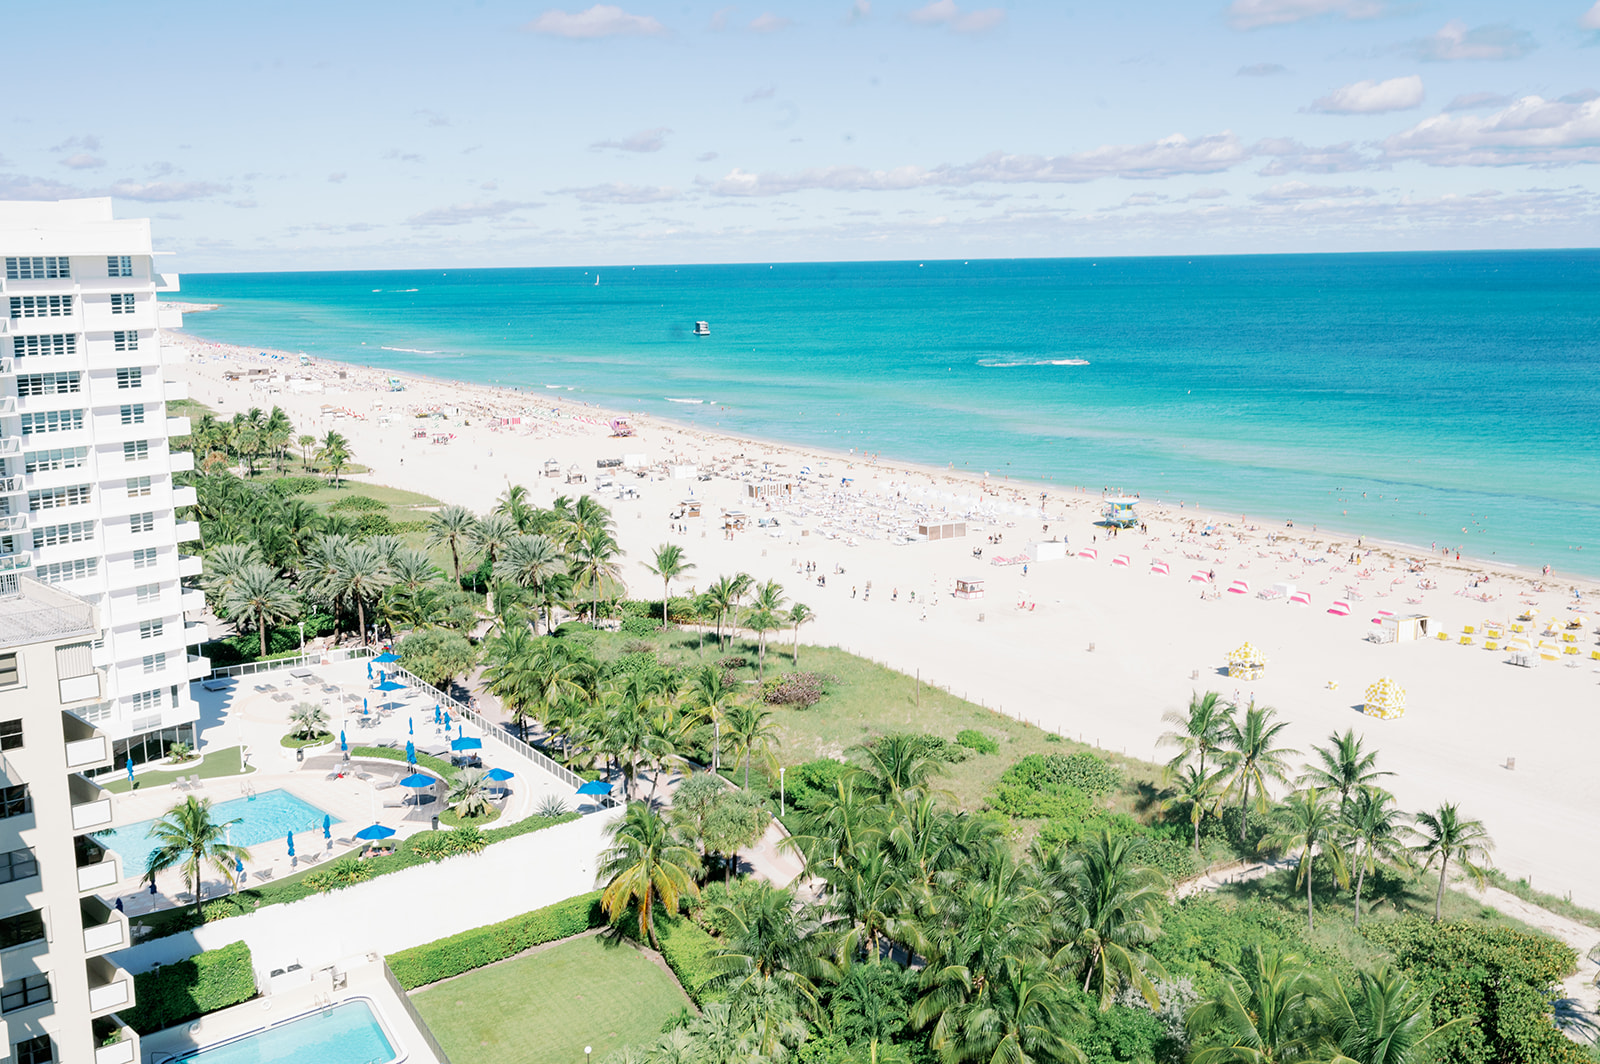 Balcony view from Loews Hotel in Miami Beach.